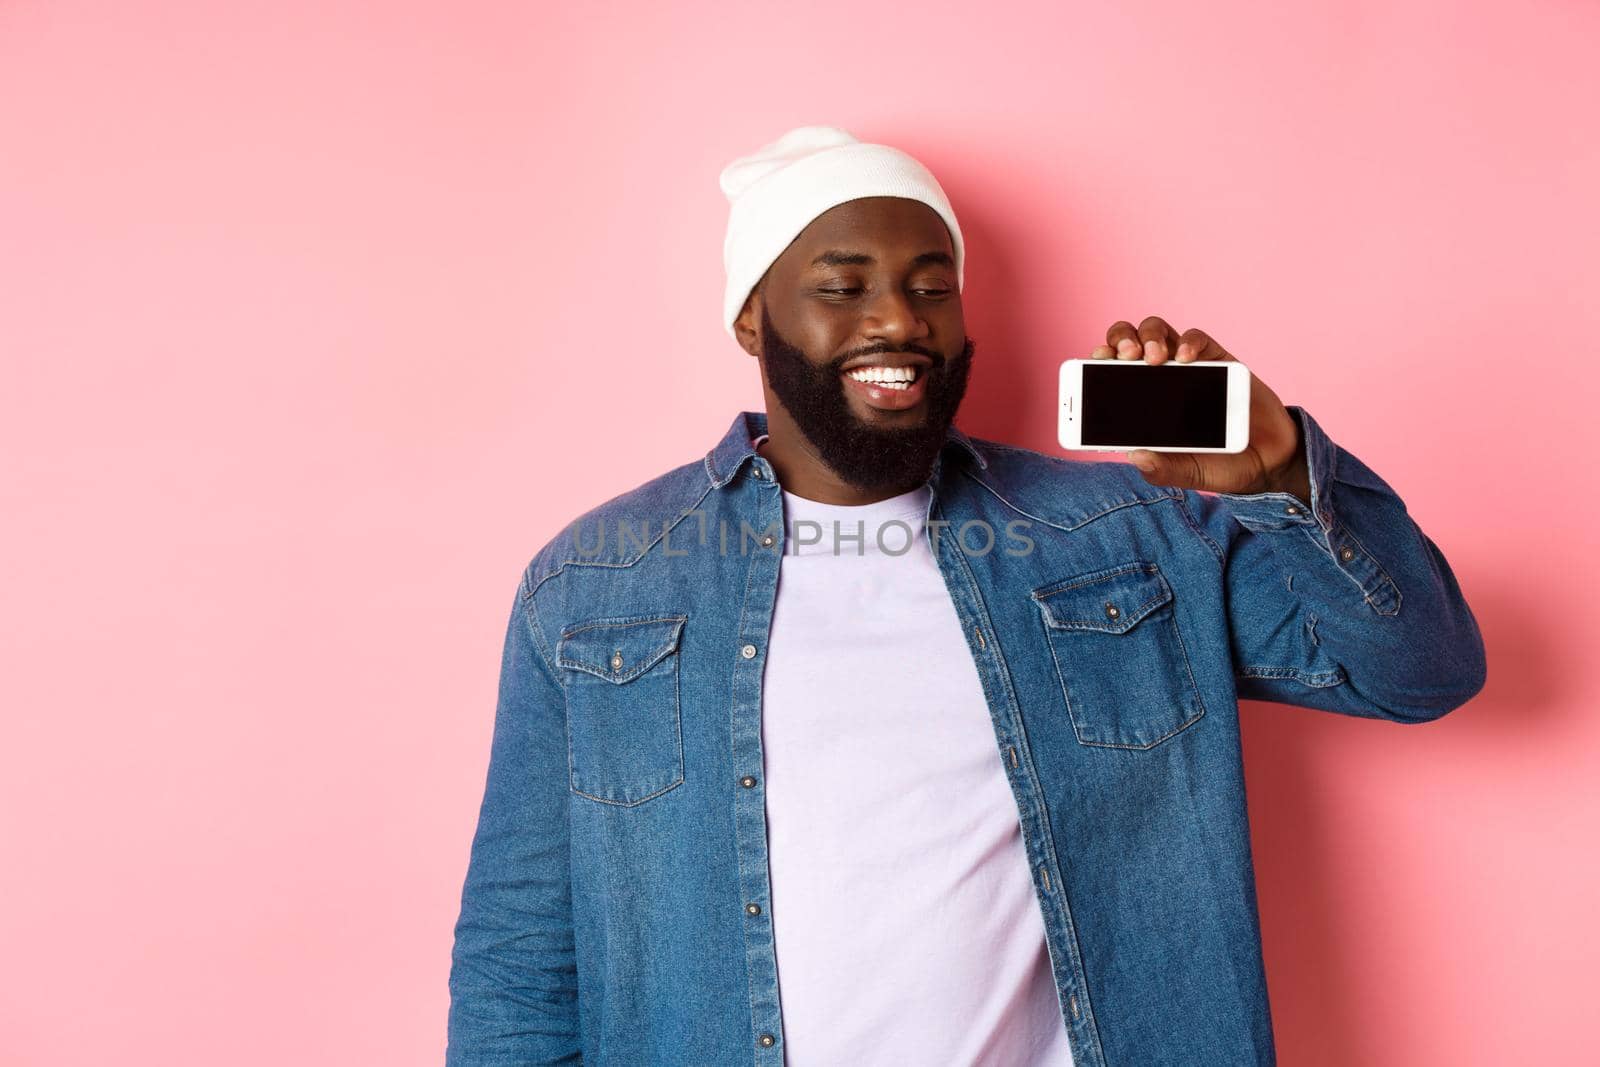 Online shopping and technology concept. Happy young african-american man smiling, showing smartphone screen horizontally with satisfied face expression, pink background.